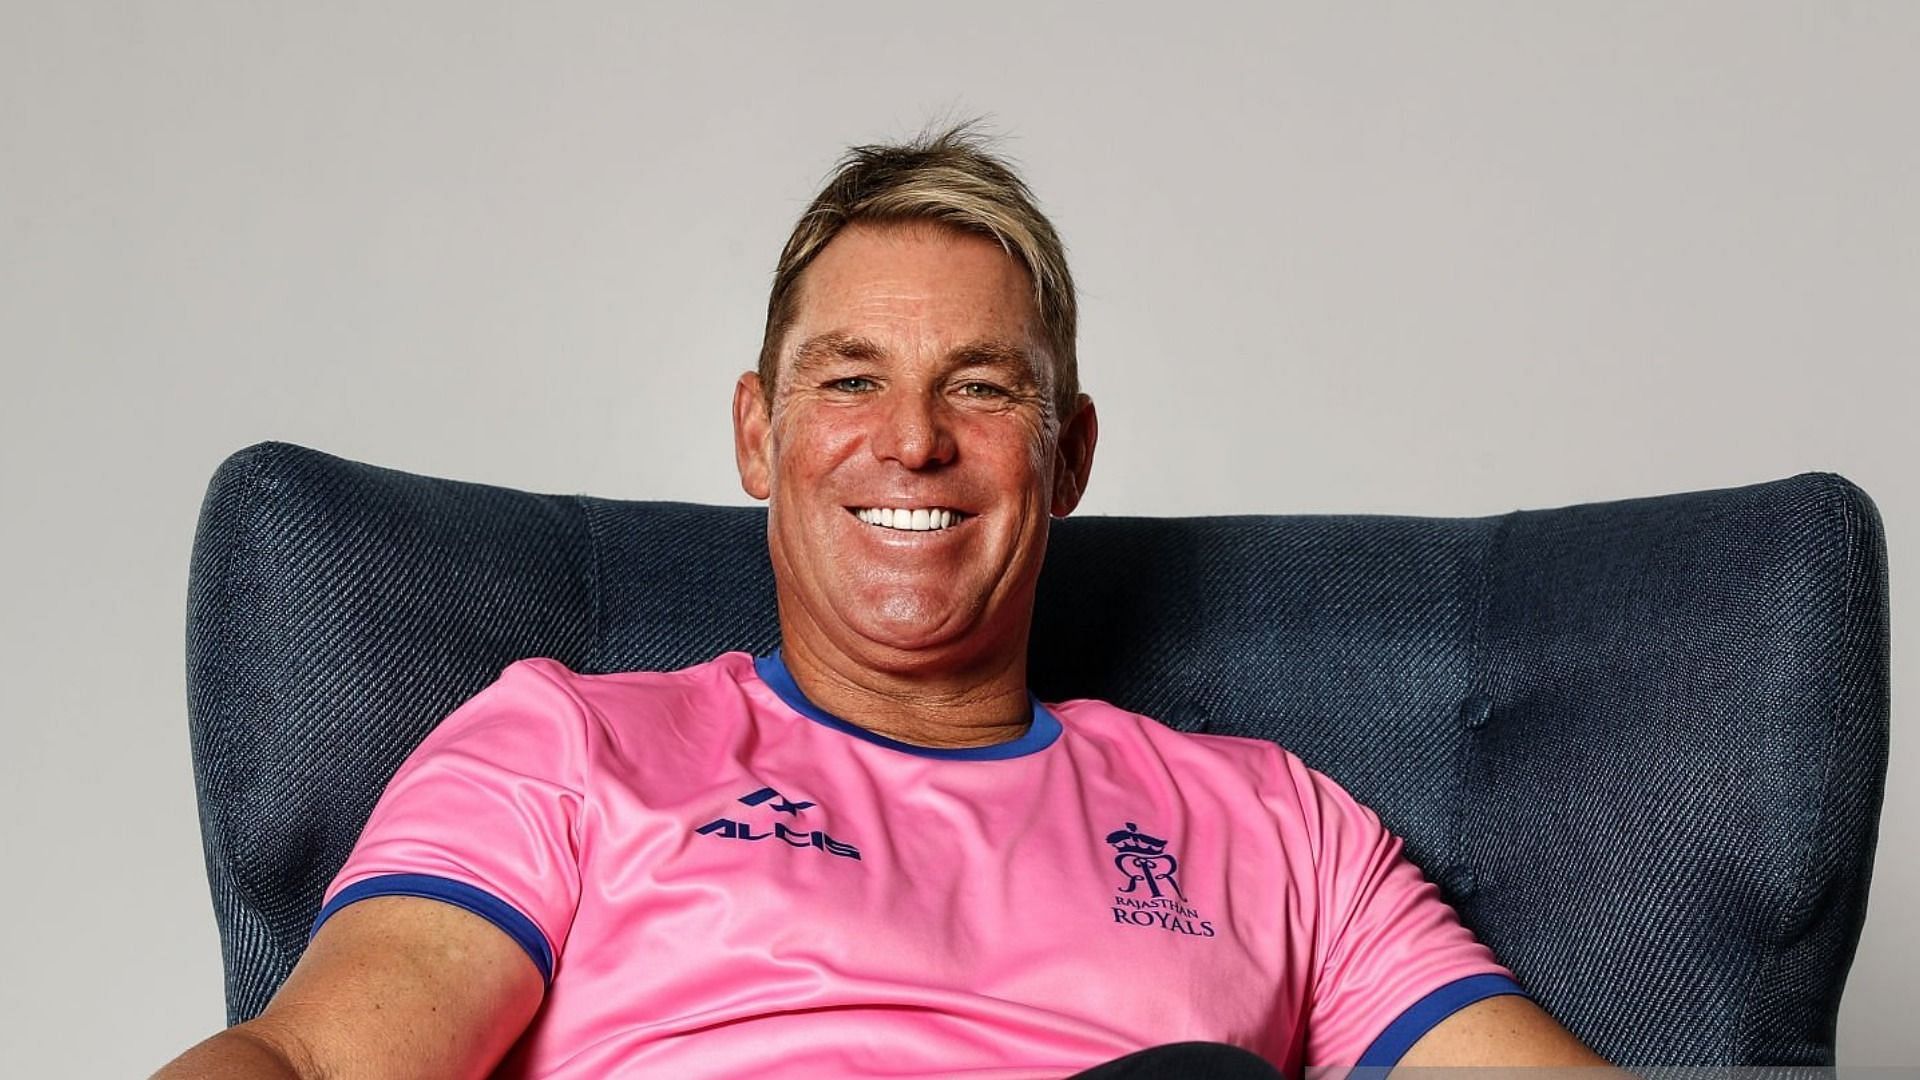 Australian cricket legend Shane Warne passes away at 52 due to a suspected cardiac arrest (Image via Bryn Lennon/Getty Images)